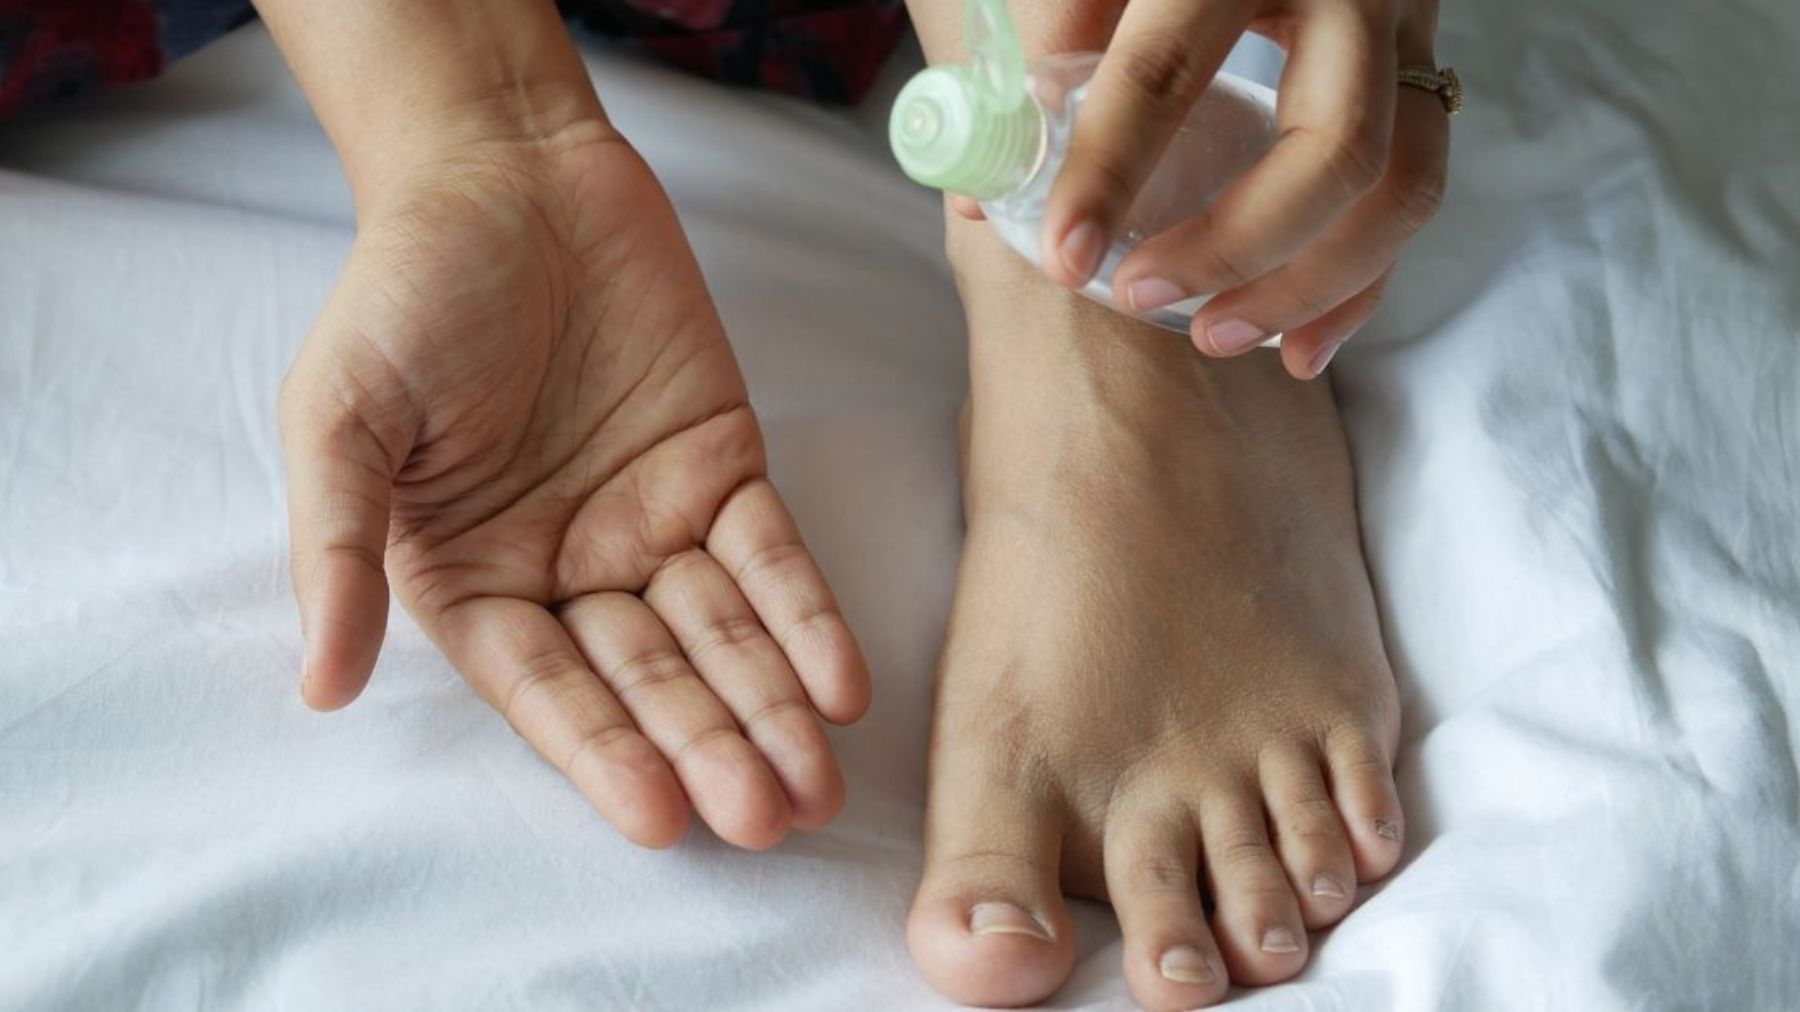 Cracked heels: 10 natural remedies to solve the problem